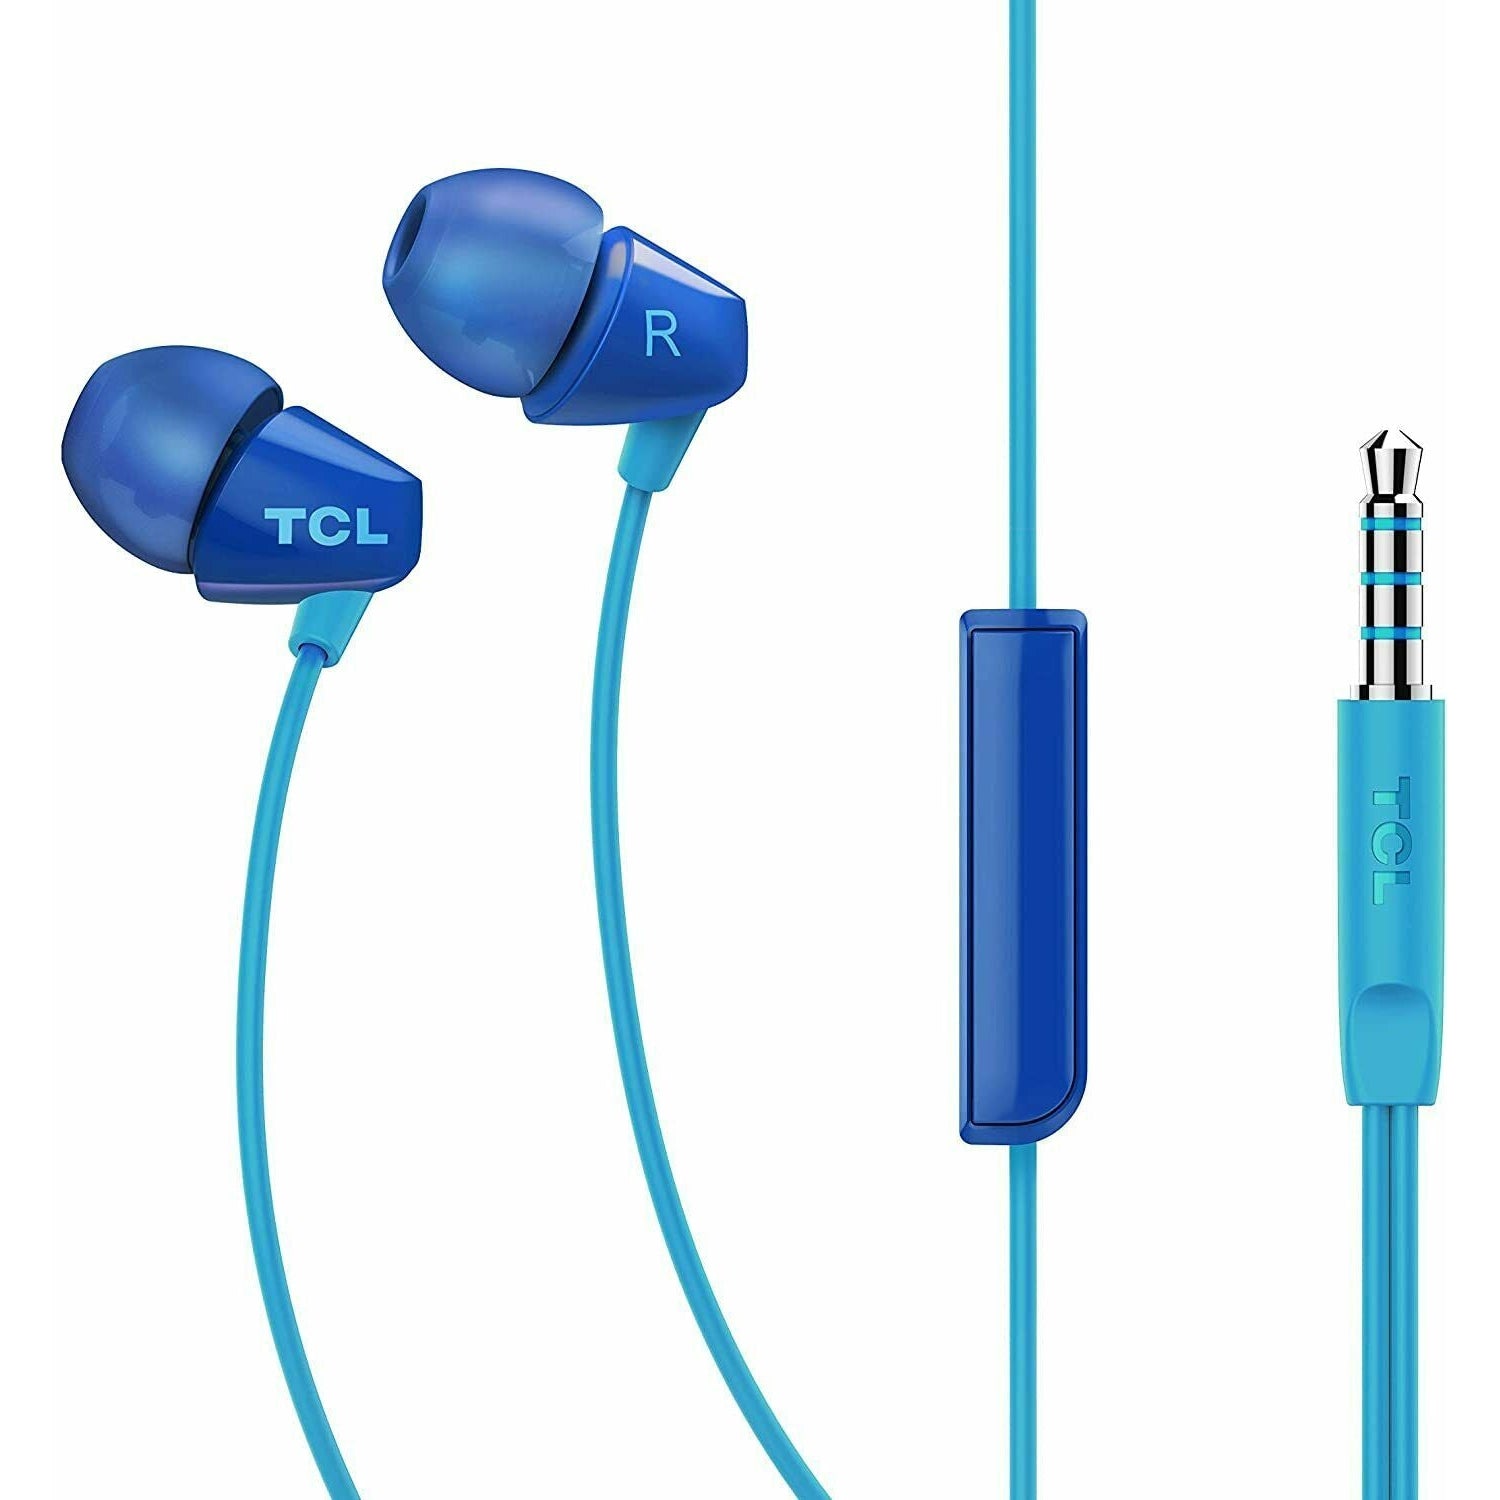 TCL SOCL100 In-Ear Headphones with Mic (Noise Isolation, Remote, Mic) Ocean Blue